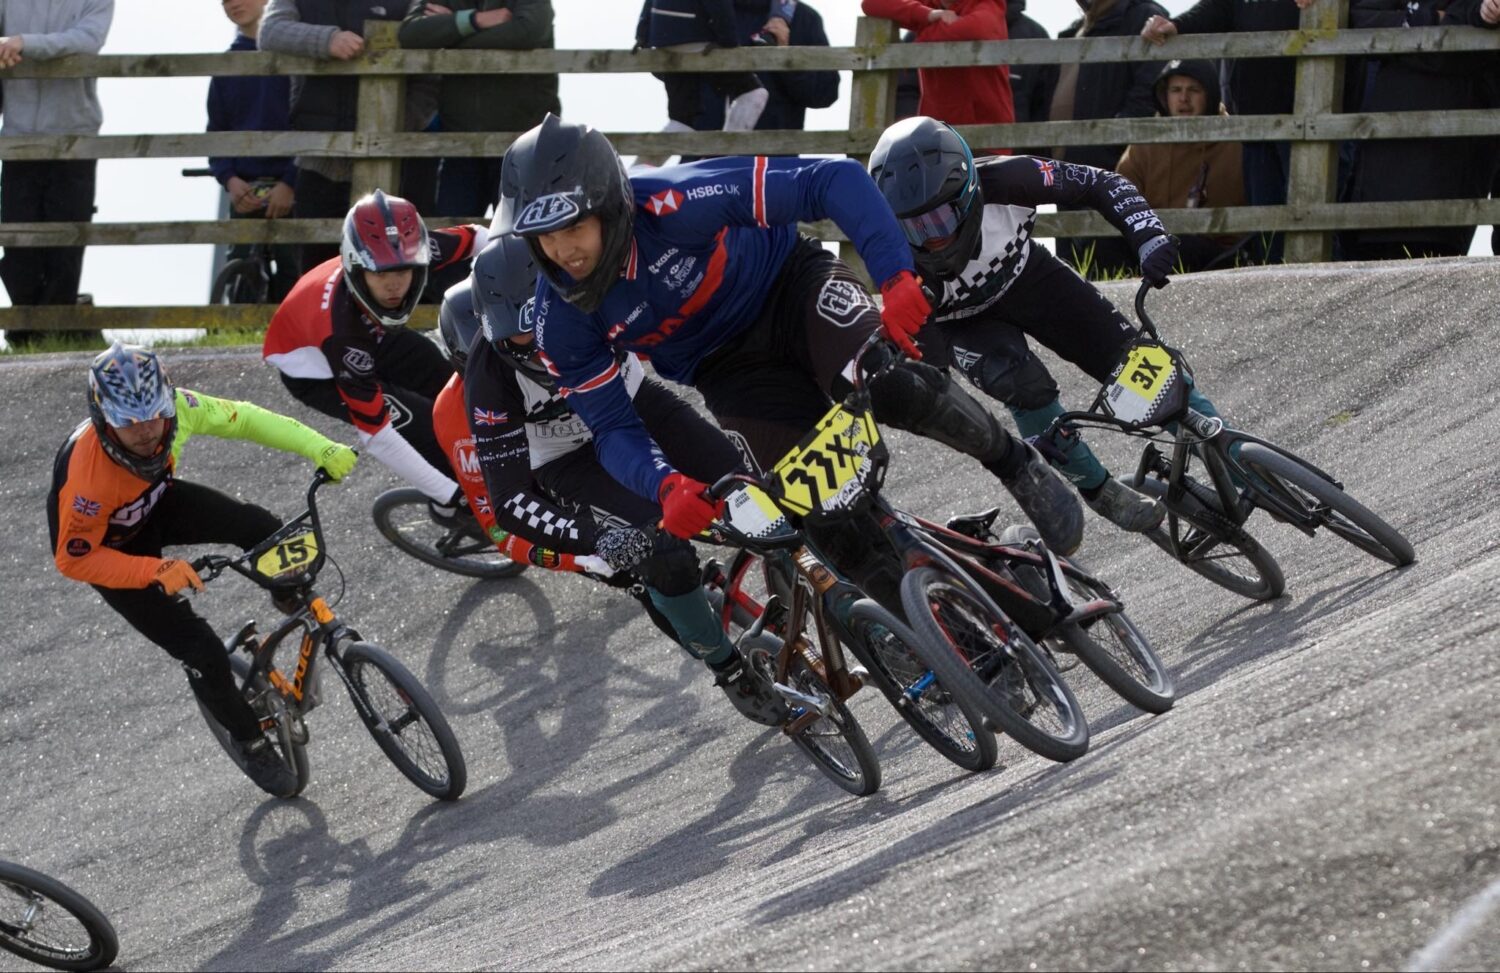 A group of young men are pictured racing each other on BMX bicycles along a race track.